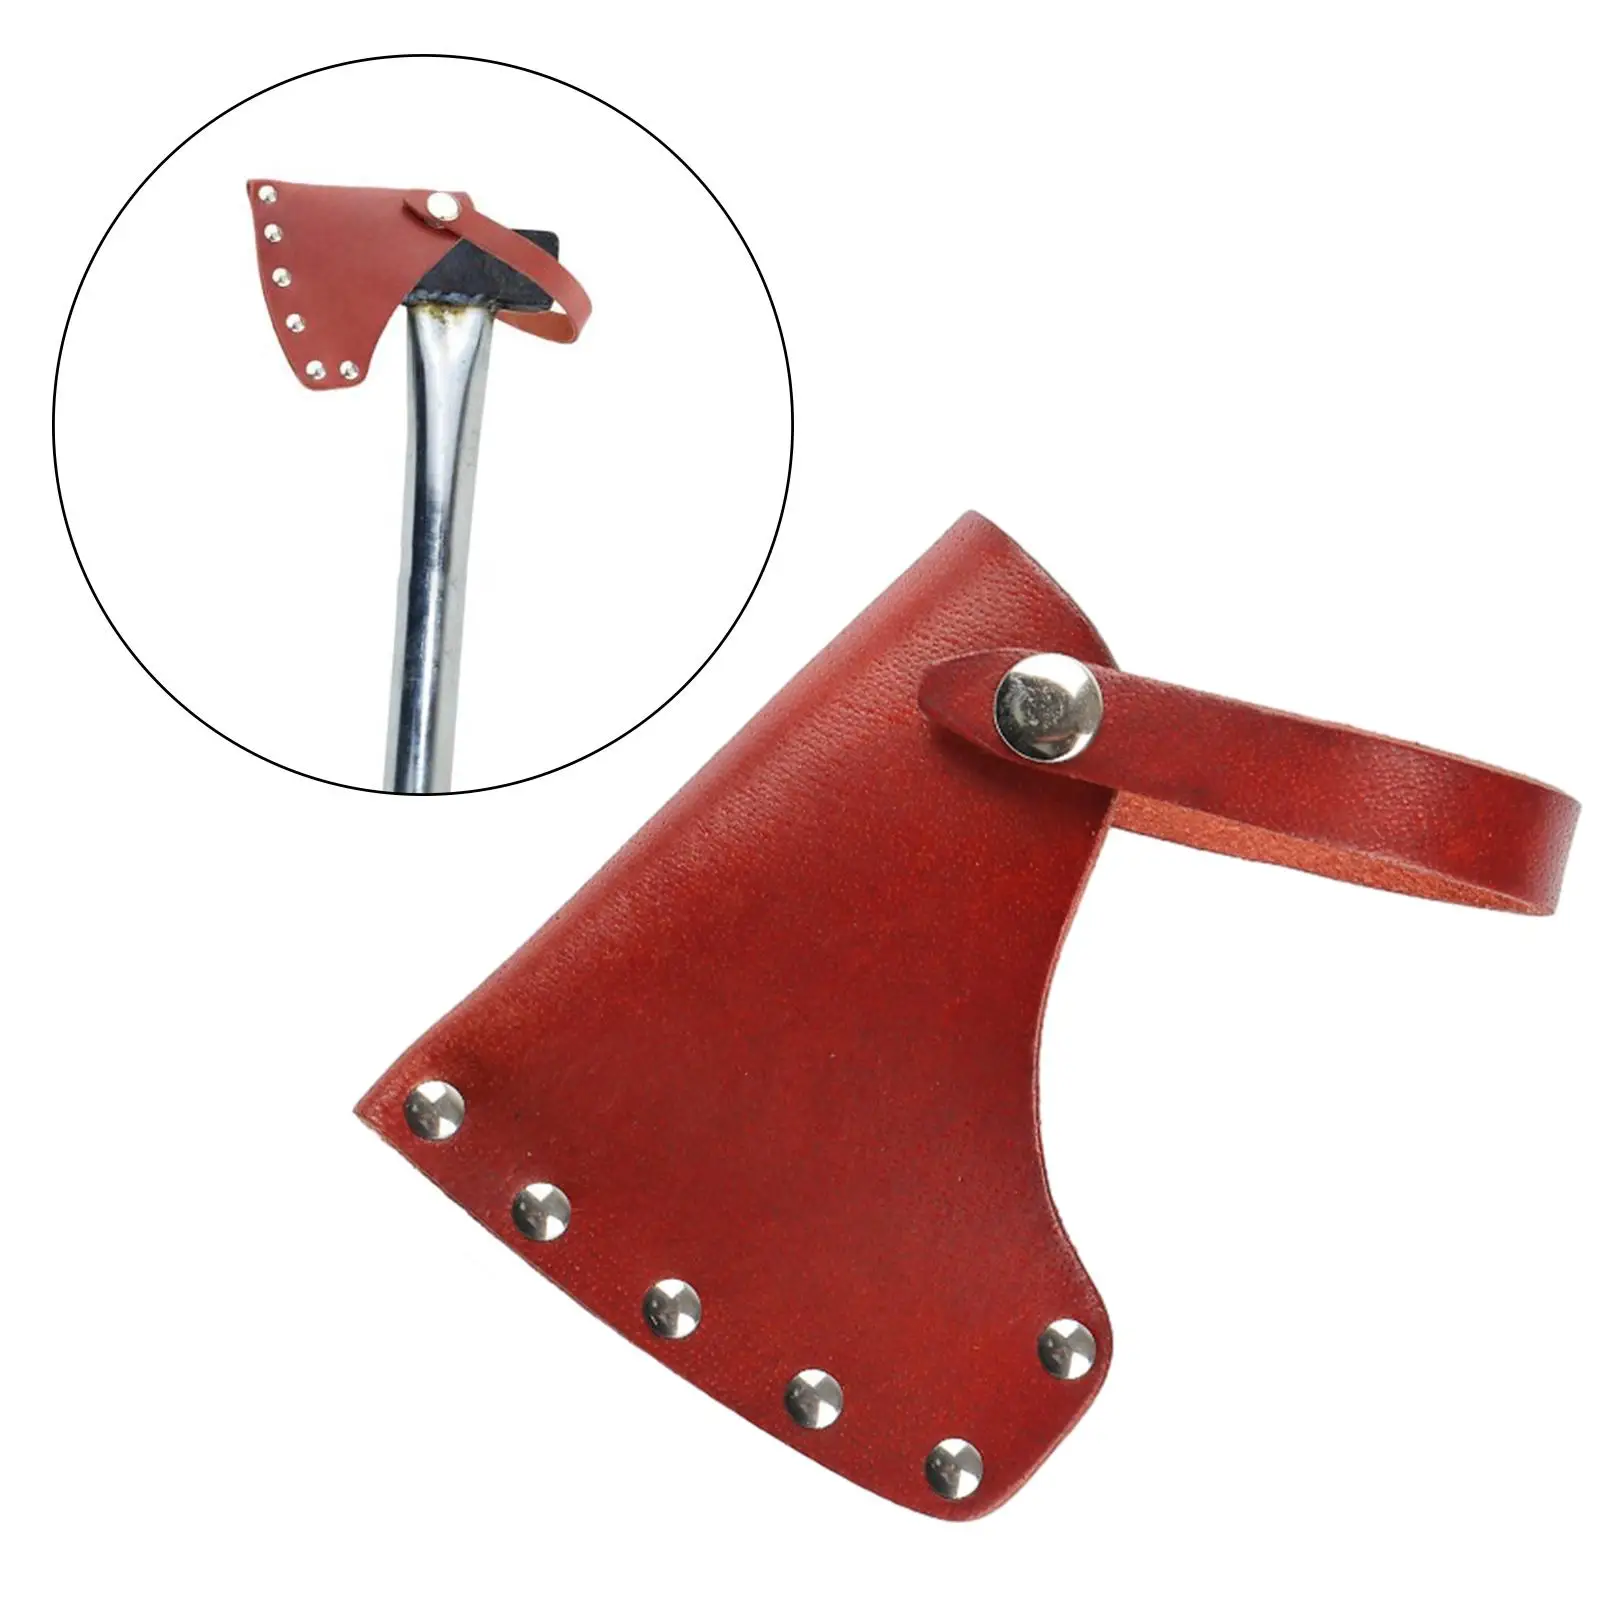 

Axe Head Holster PU Leather Protect Cover Protective Essentials Tool Hatchet Sheath for Woodworking Lumberjack Outdoor Hunting